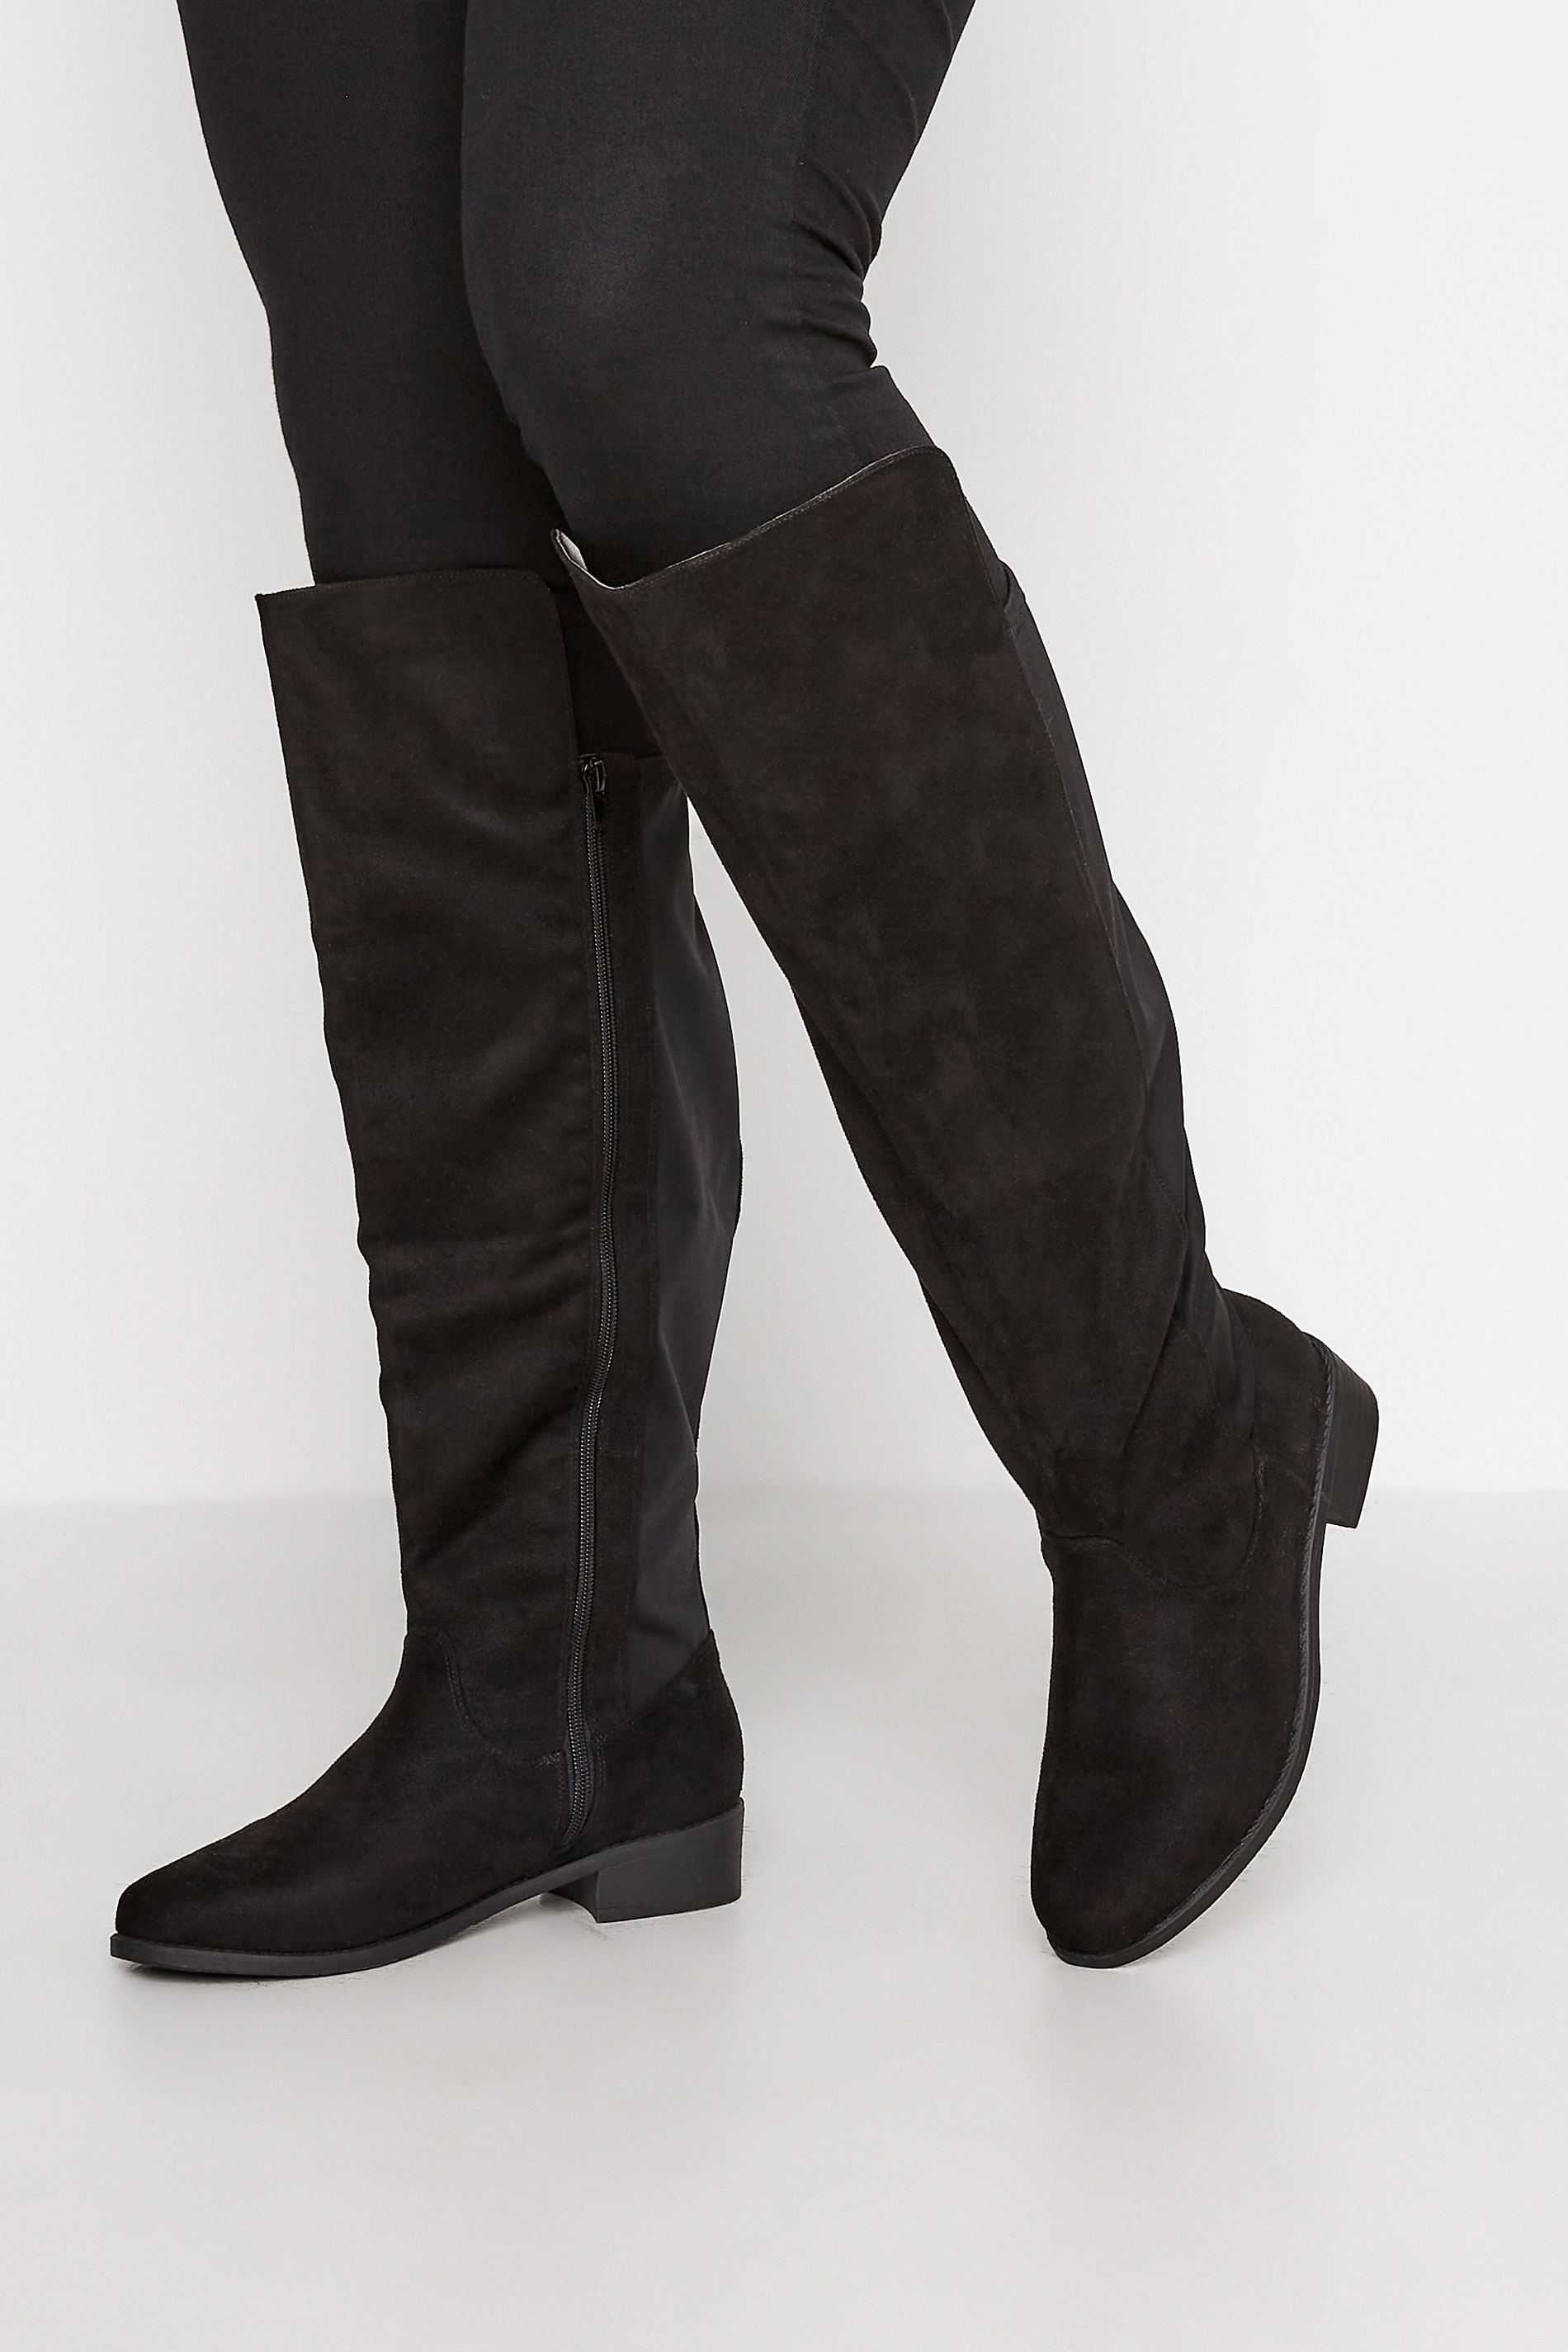 Black Suede Stretch Knee High Boots In Extra Wide EEE Fit 1